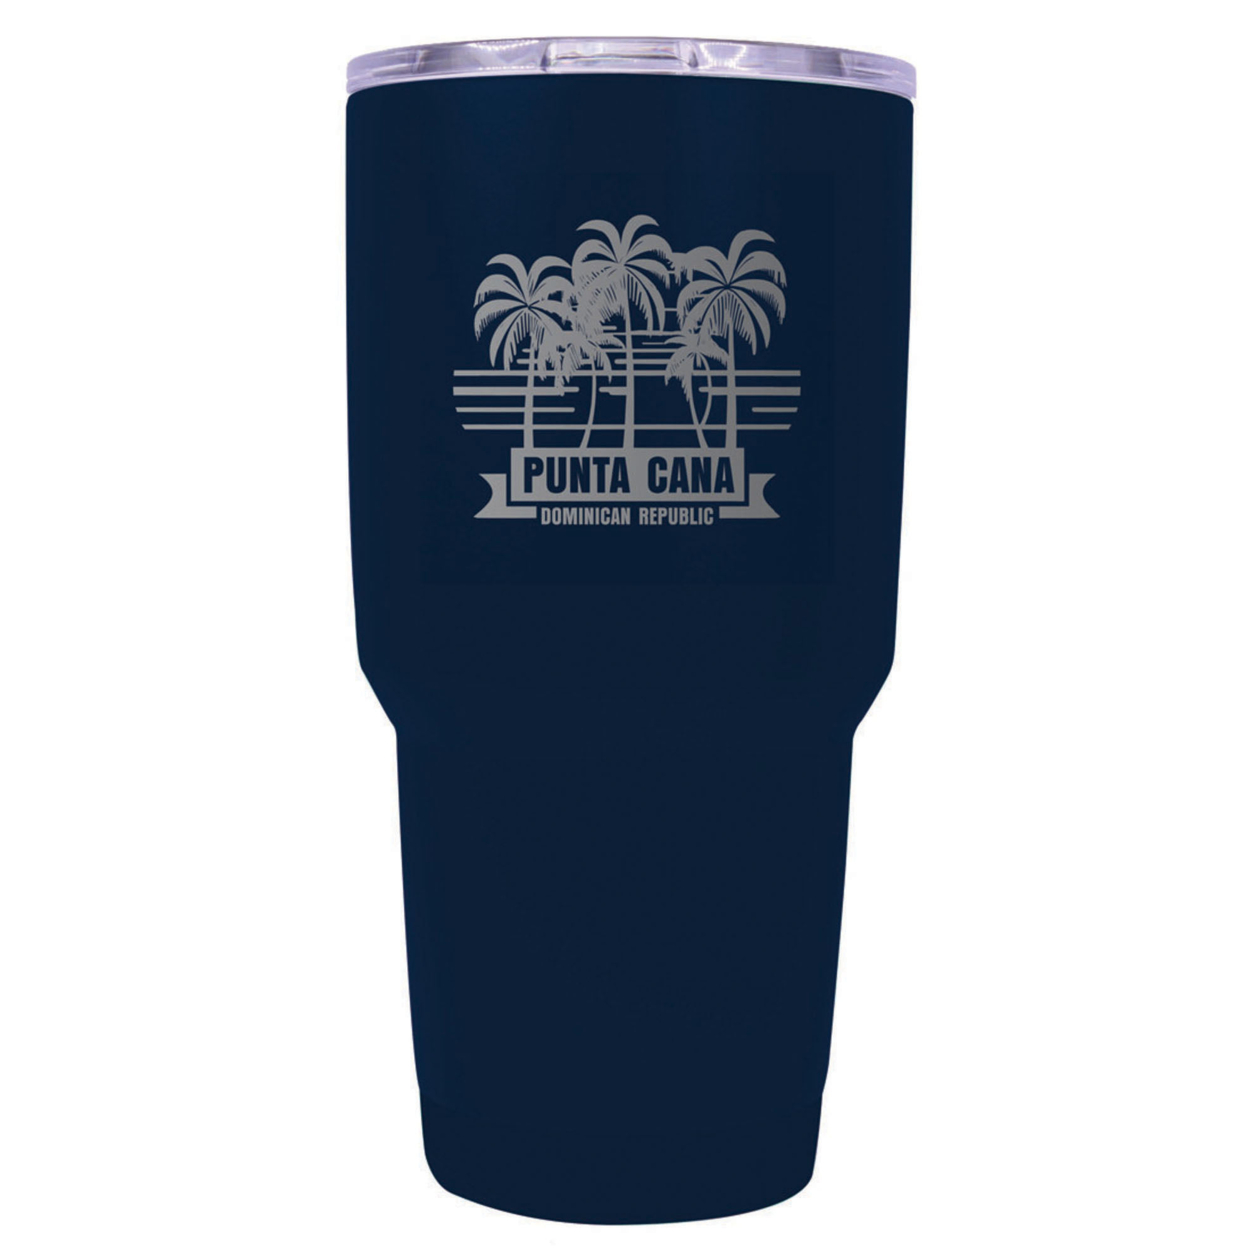 Punta Cana Dominican Republic Souvenir 24 Oz Insulated Stainless Steel Tumbler Etched - Navy, PALM BEACH